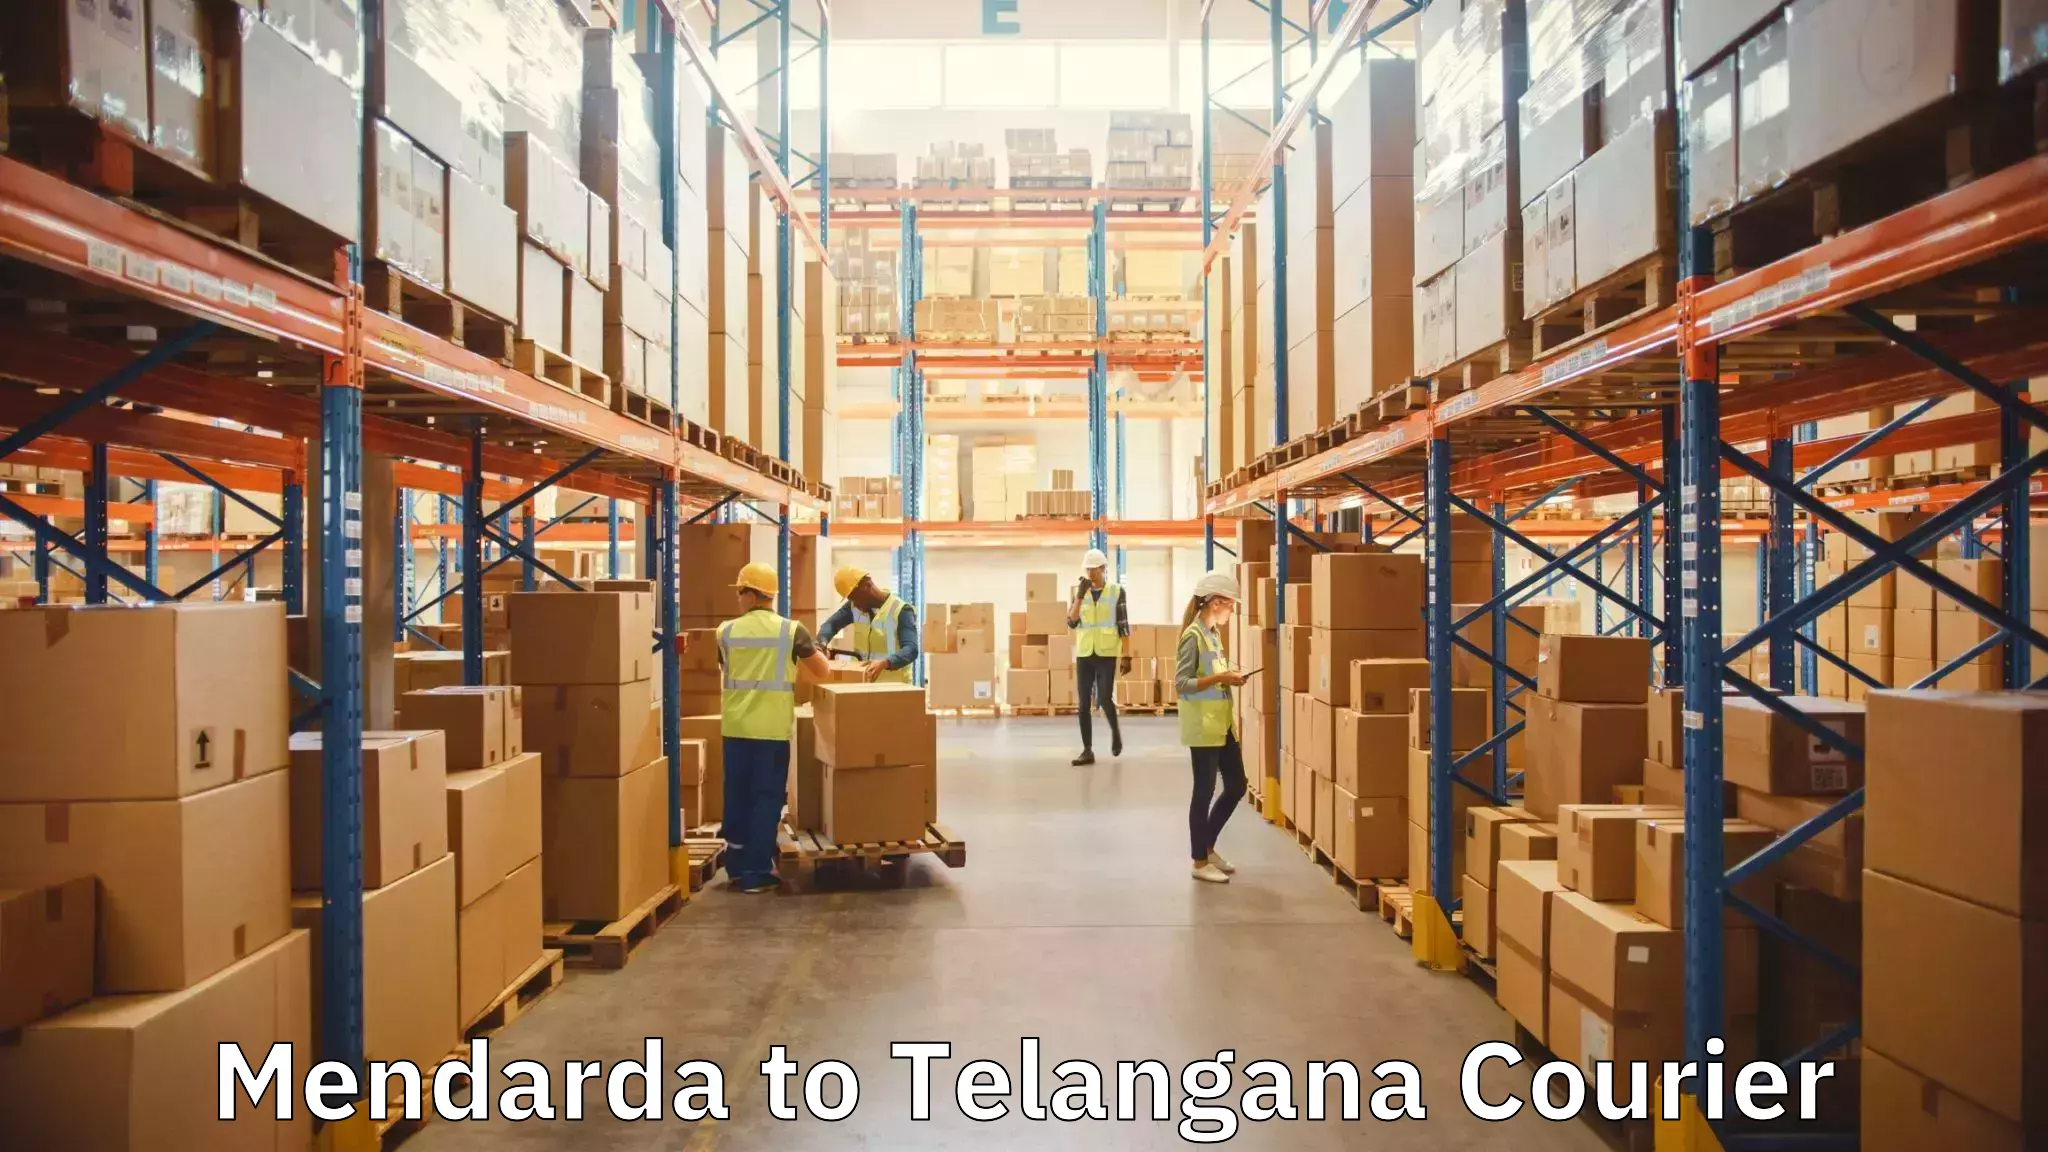 Home relocation experts Mendarda to Tadvai